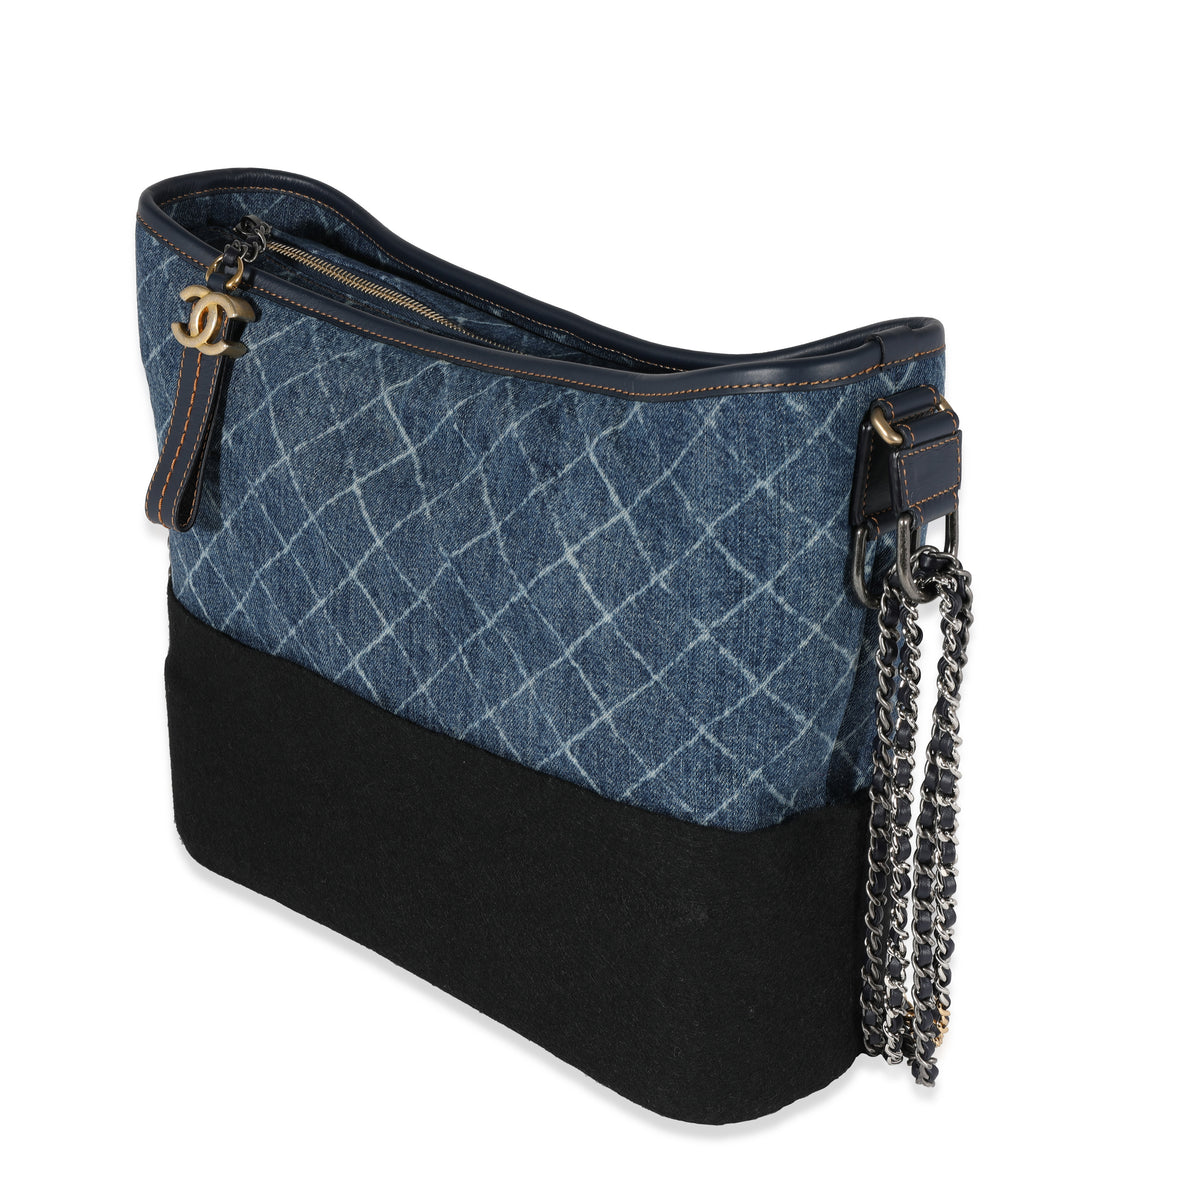 Chanel Blue Quilted Denim & Calfskin Large Gabrielle Hobo